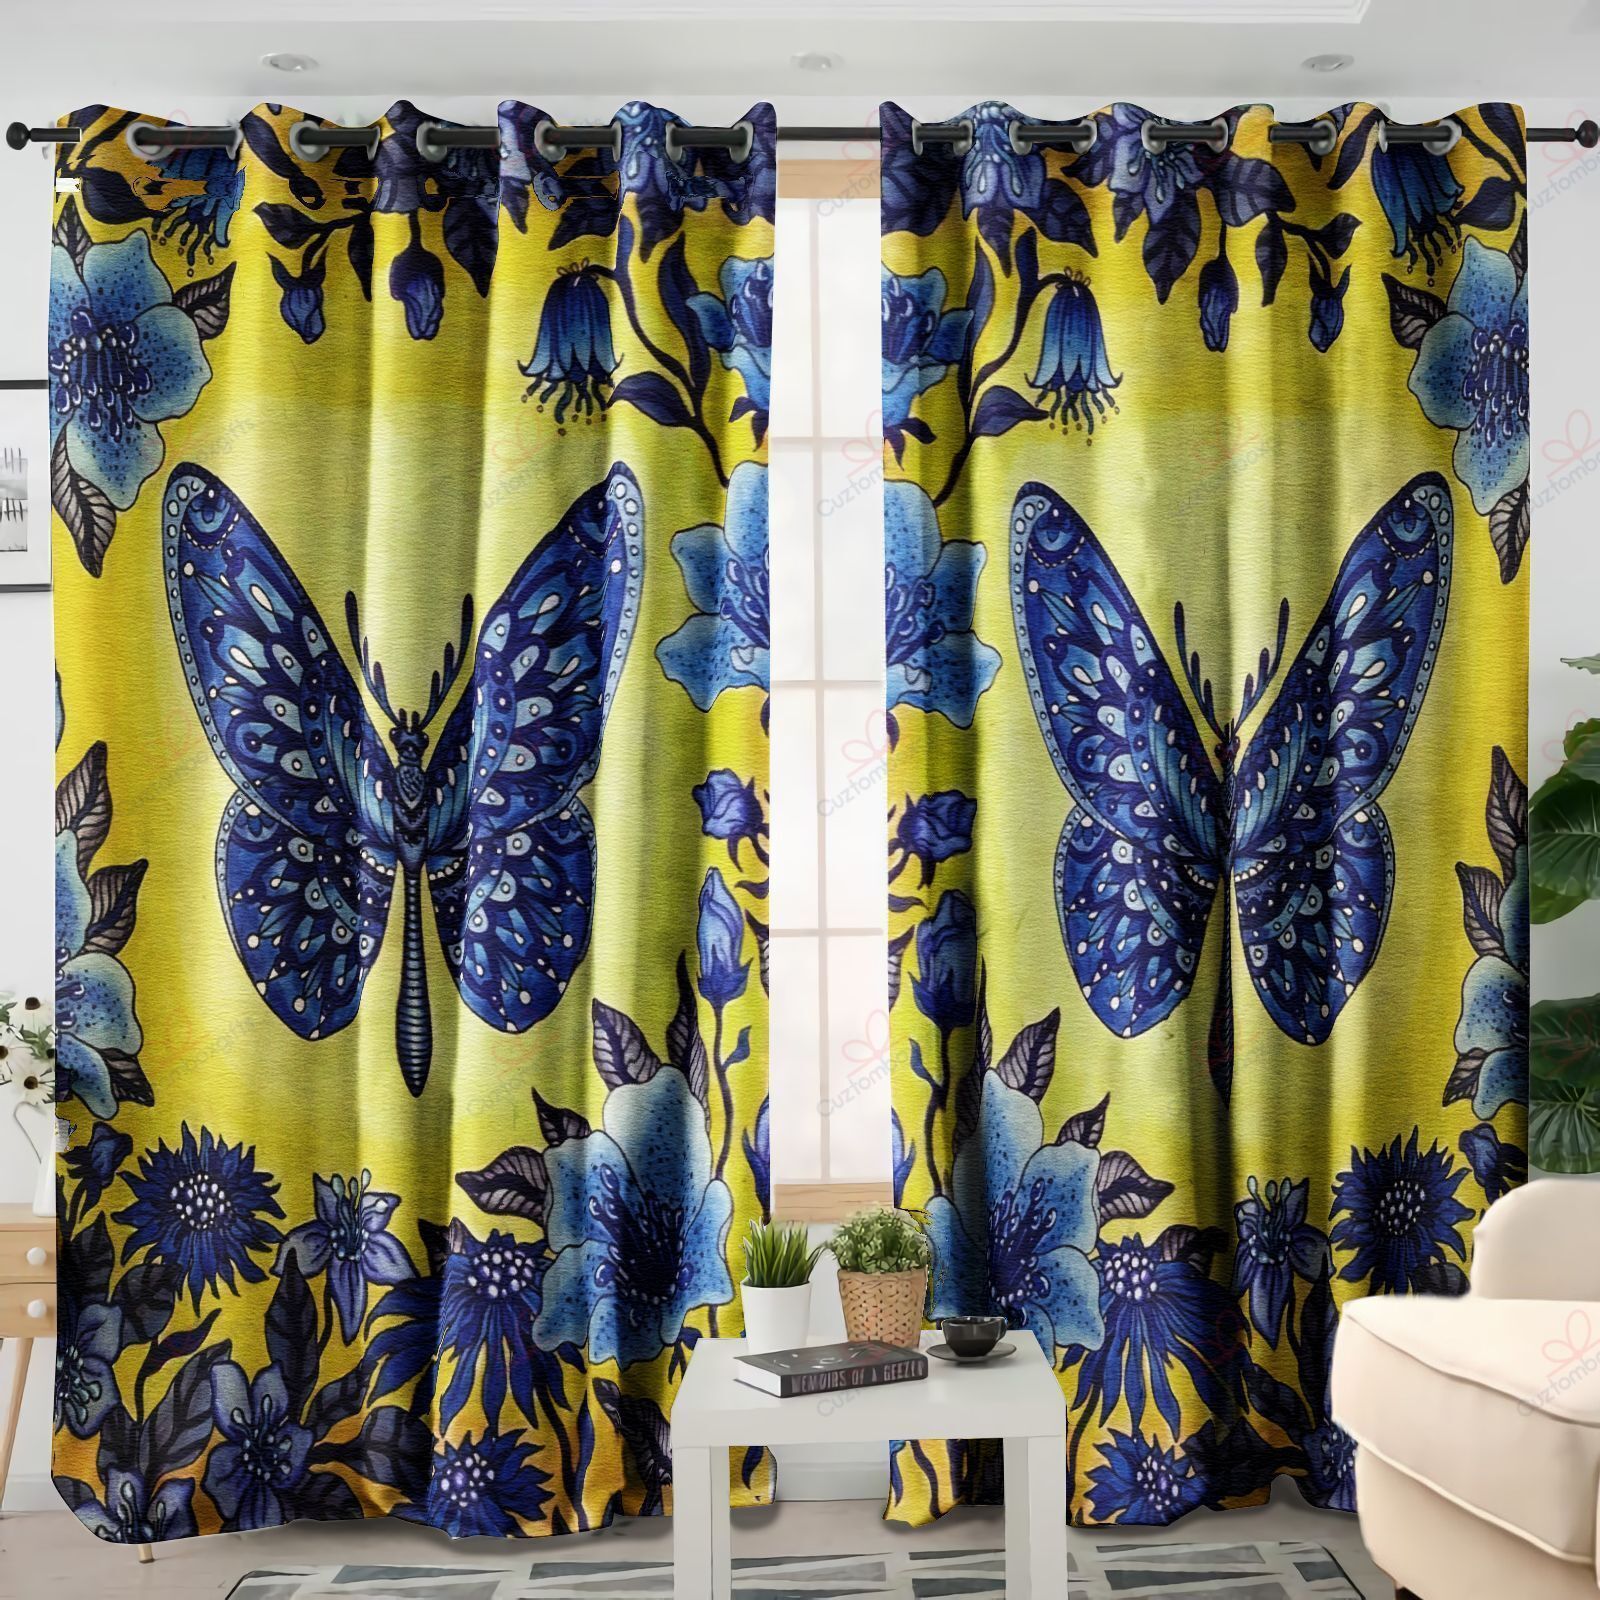 Blue Butterfly Art Printed Window Curtain Home Decor